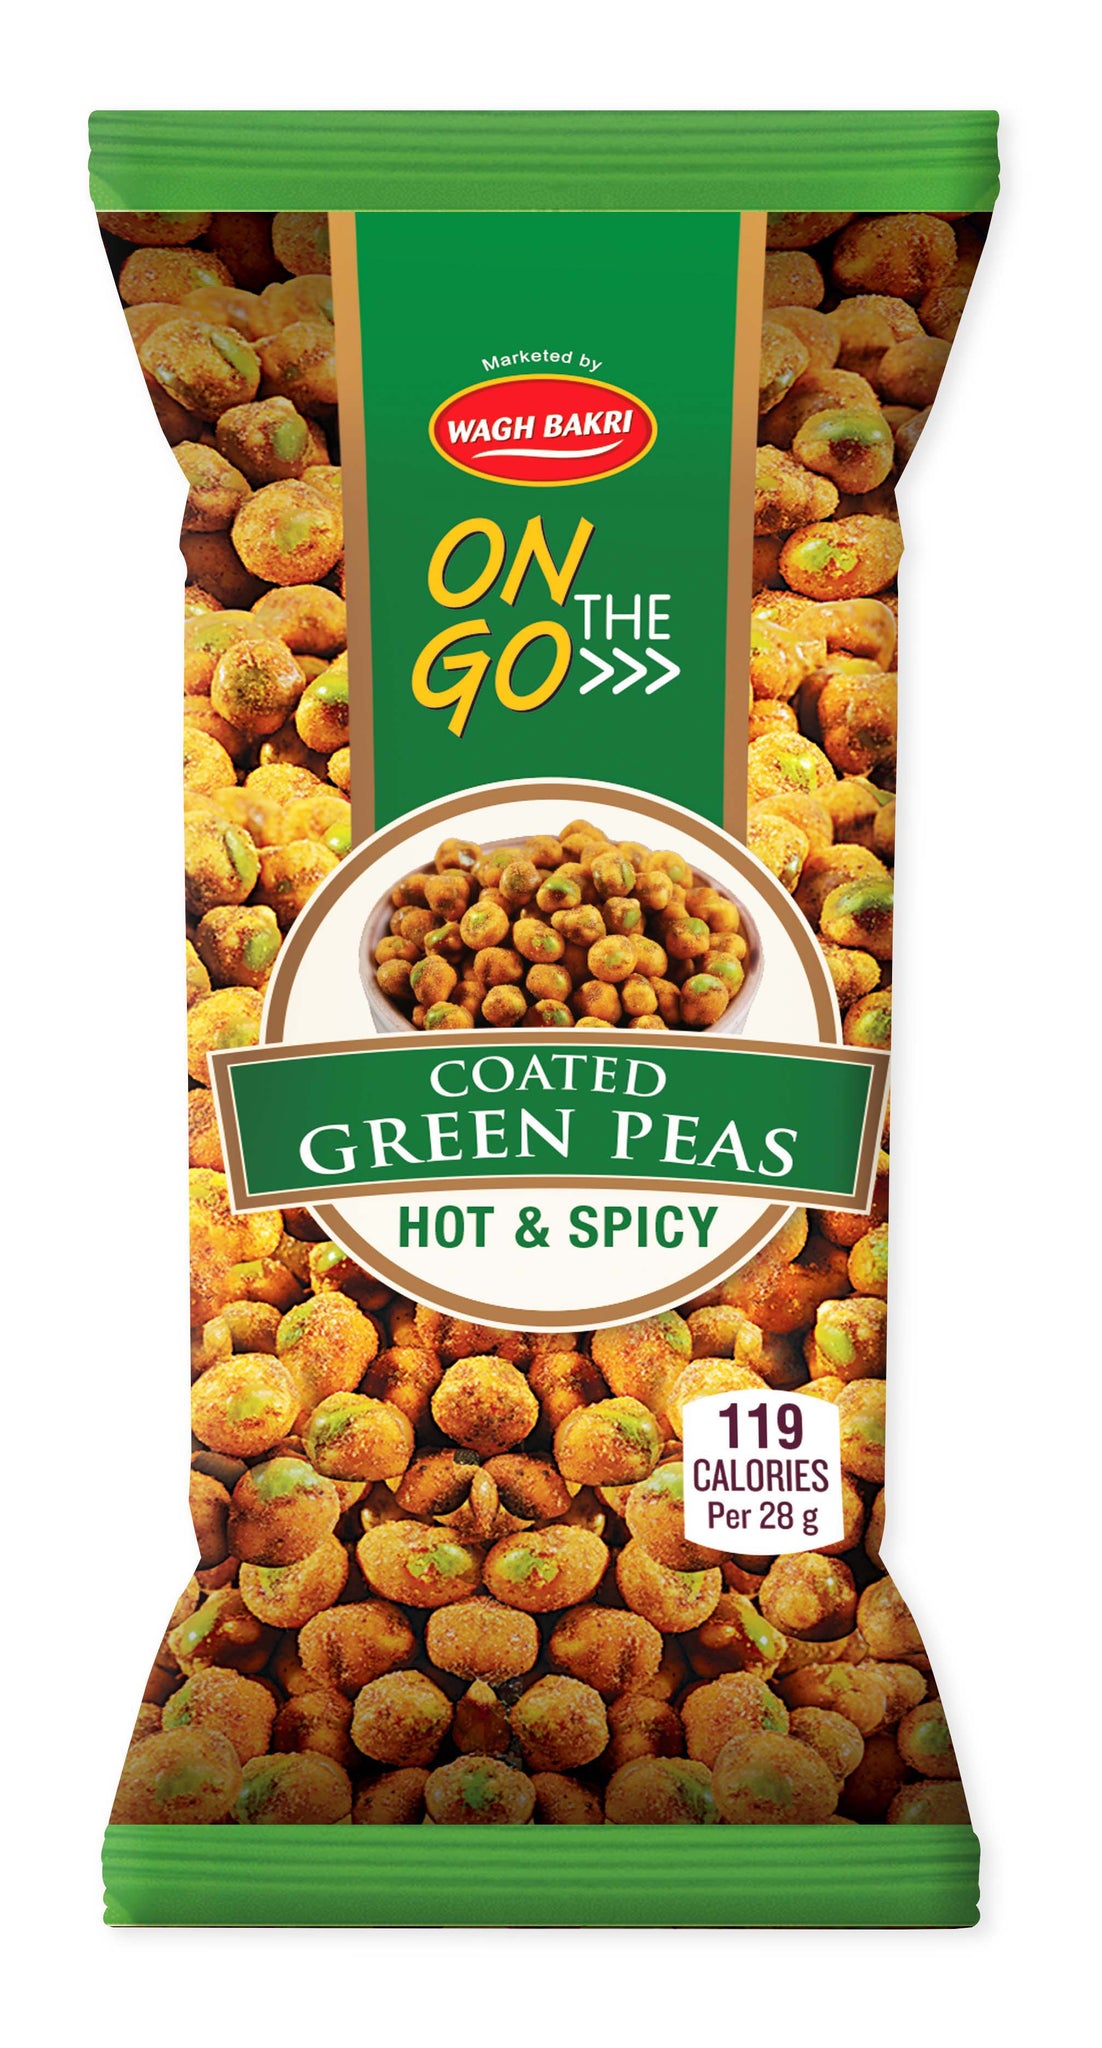 On the Go Coated Green Peas Hot & Spicy Pack of 6 Combo